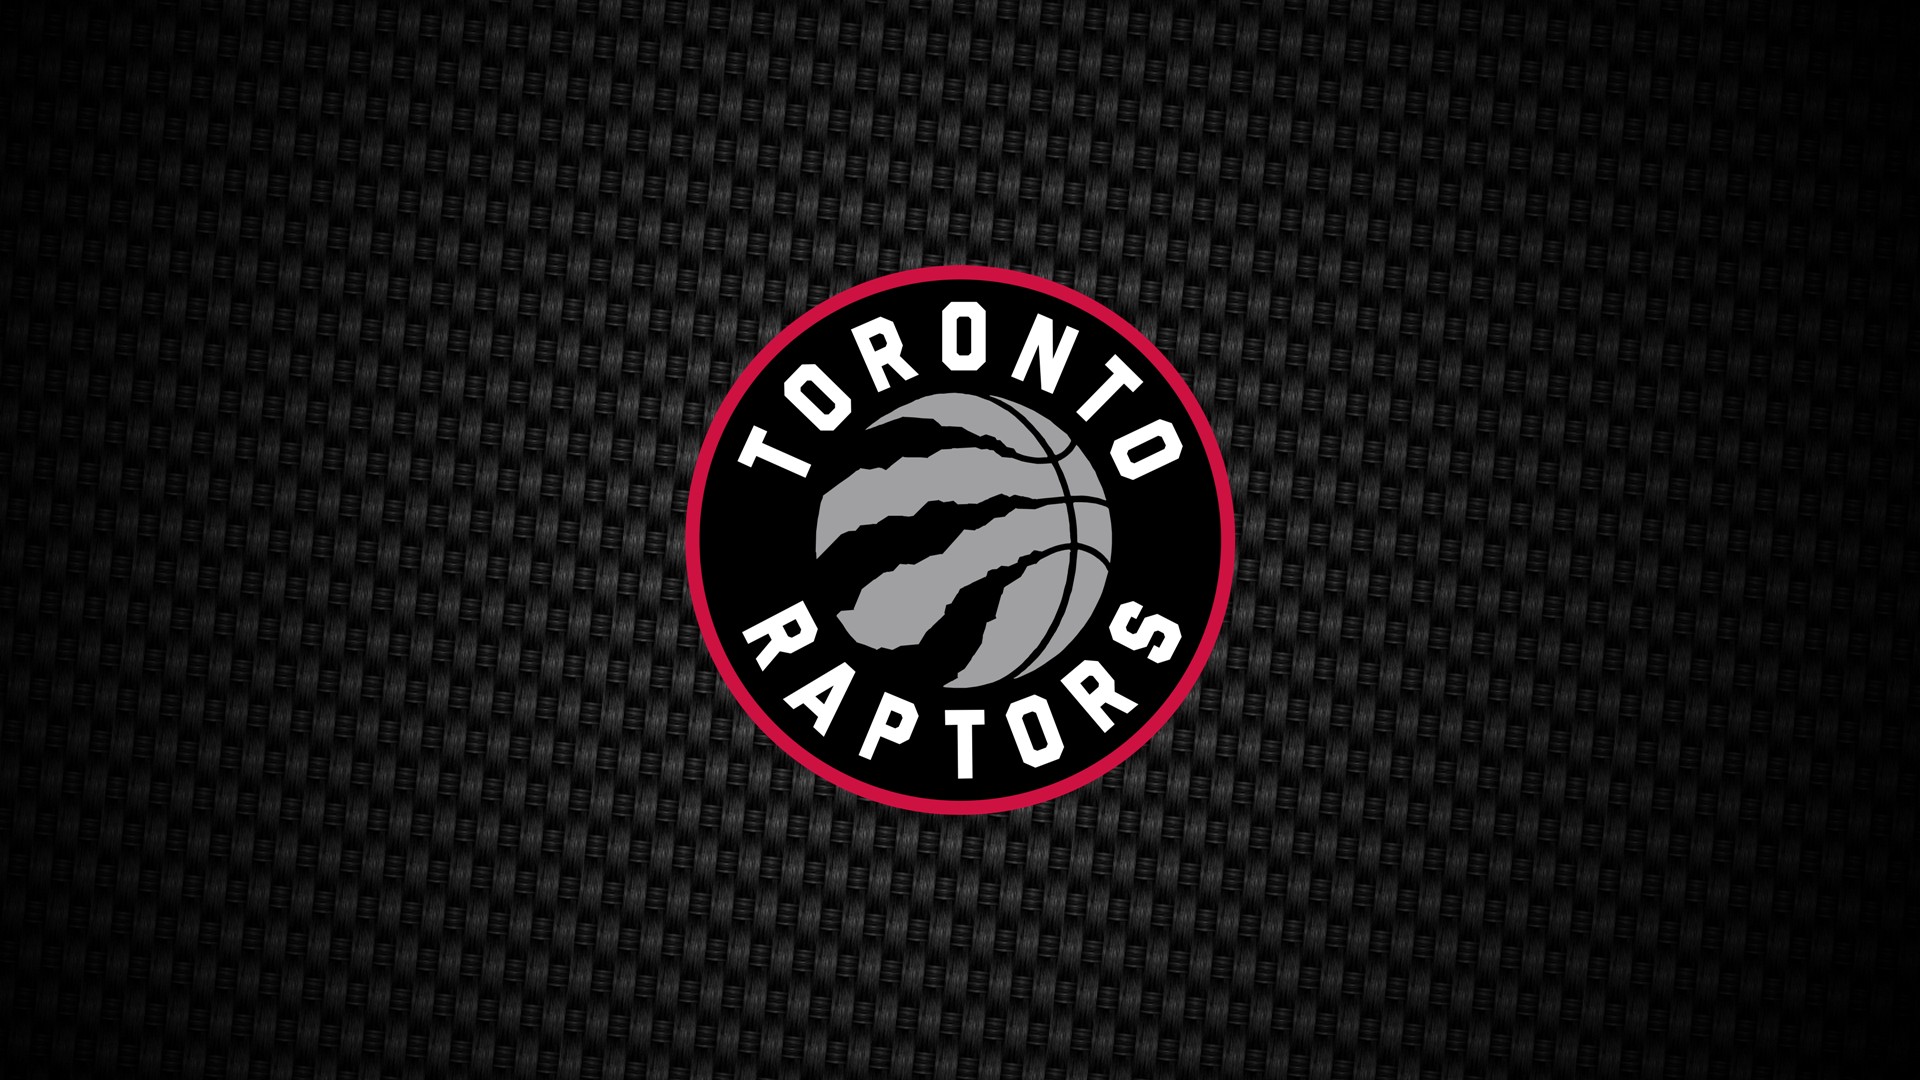 Windows Wallpaper NBA Raptors with image dimensions 1920x1080 pixel. You can make this wallpaper for your Desktop Computer Backgrounds, Windows or Mac Screensavers, iPhone Lock screen, Tablet or Android and another Mobile Phone device